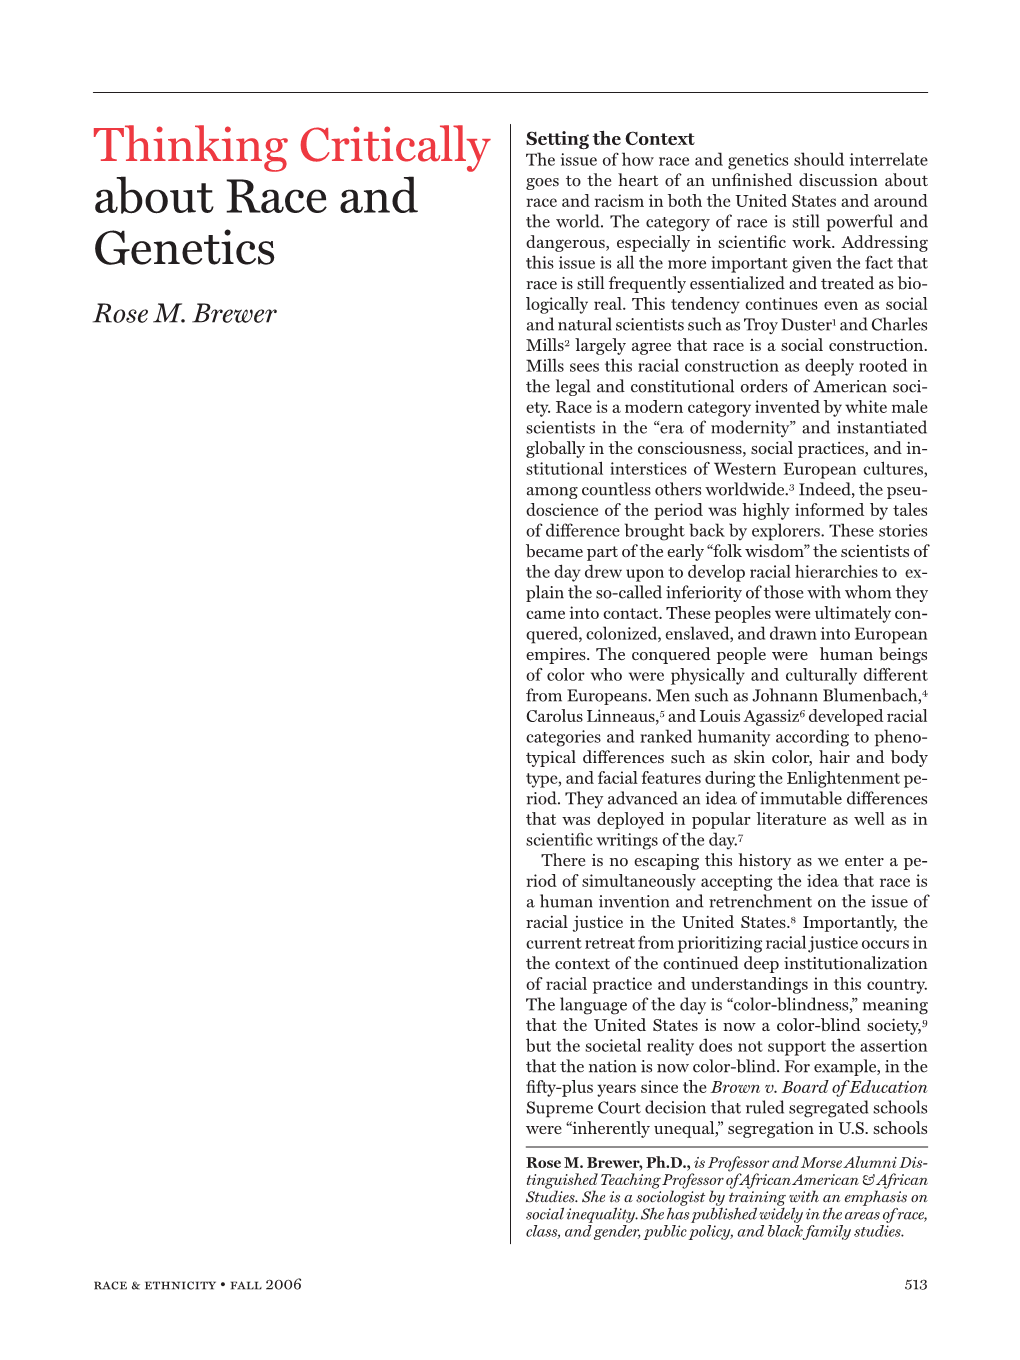 Thinking Critically About Race and Genetics